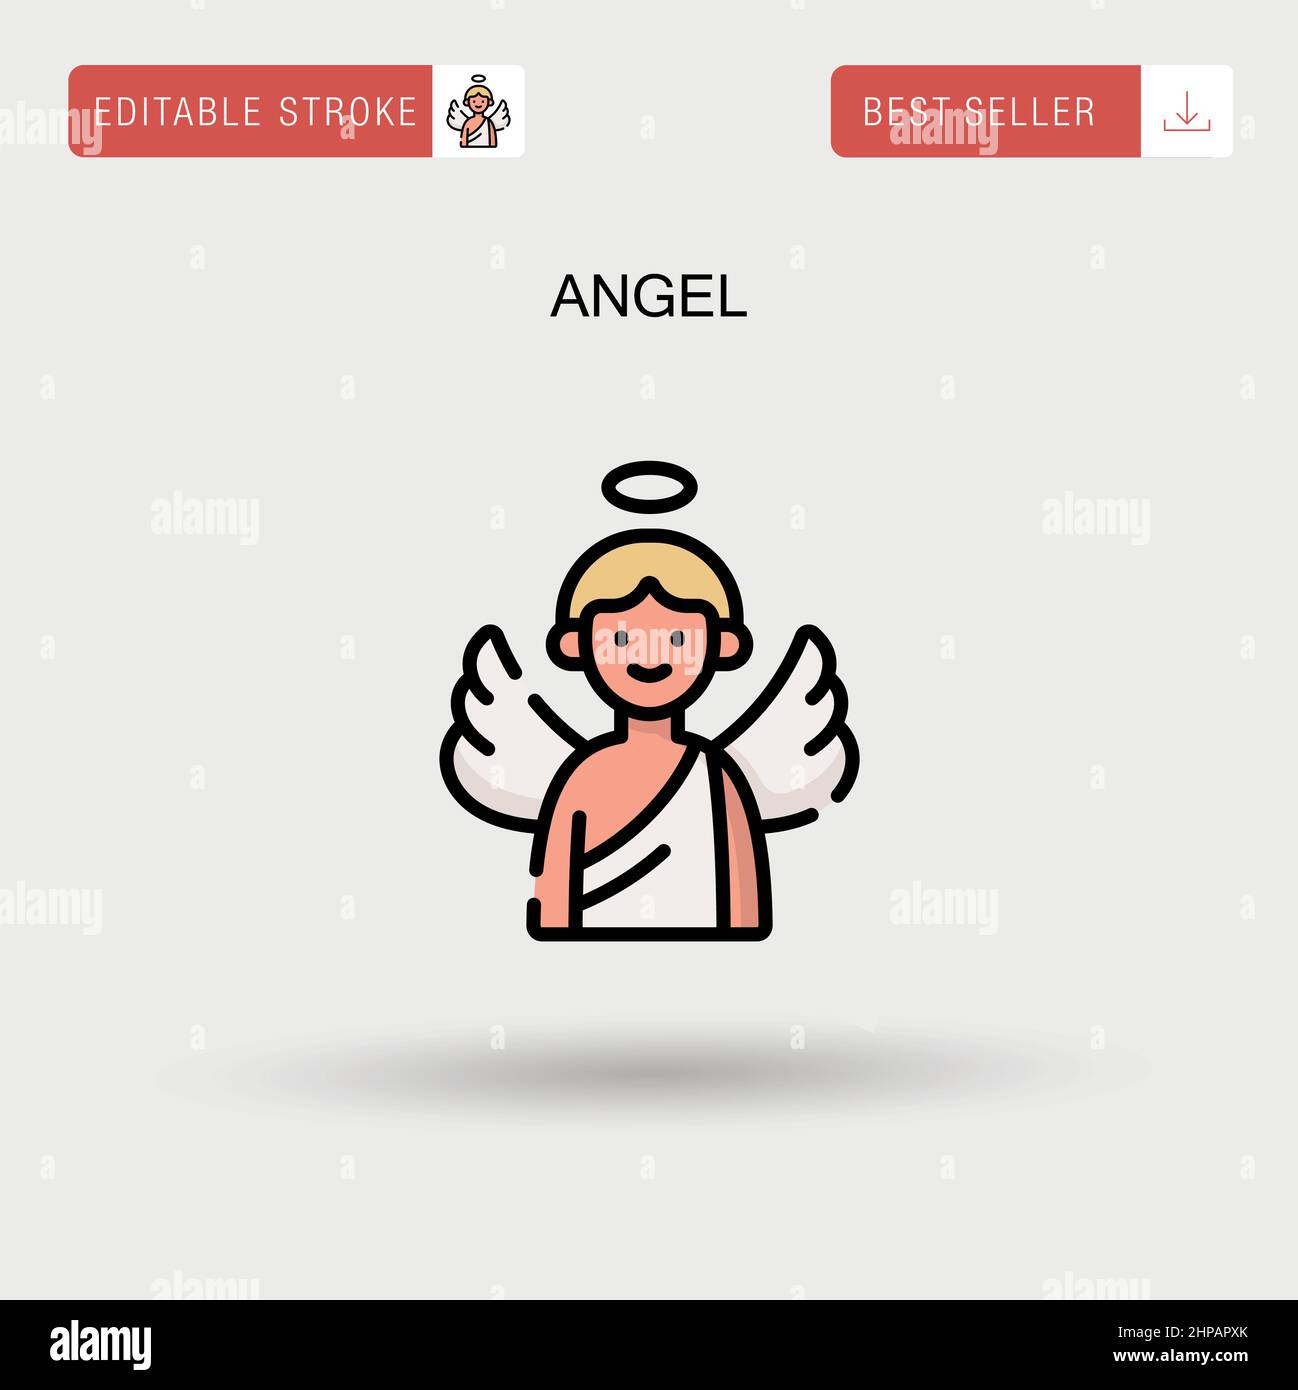 Angel Images  Free Religion Photos, Symbols, PNG & Vector Icons